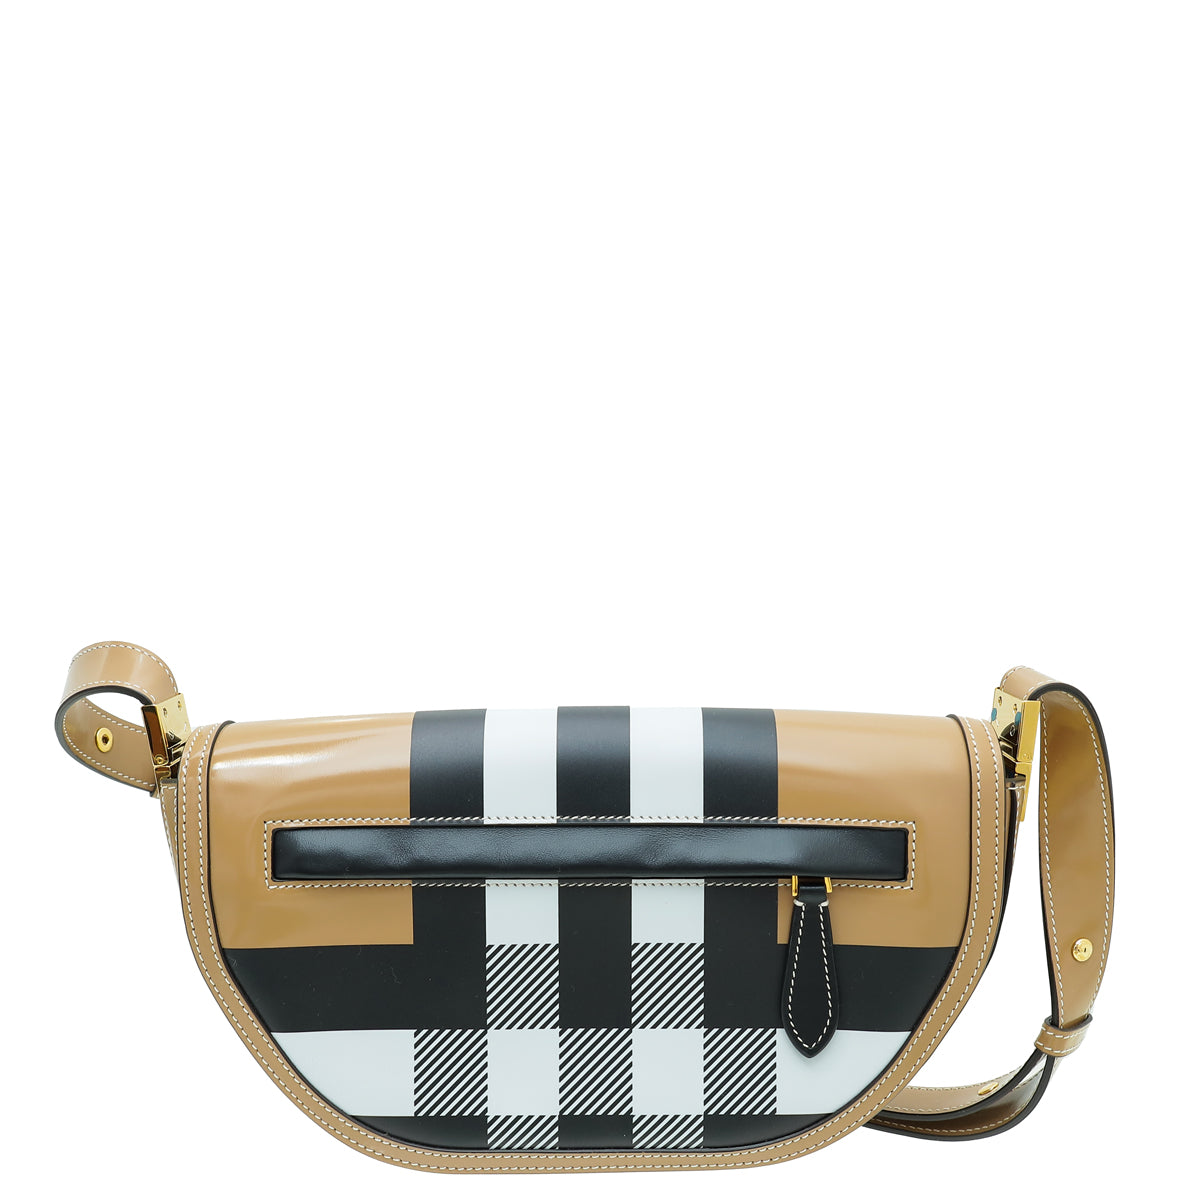 Burberry Tricolor Check Print Olympia Flap Bag